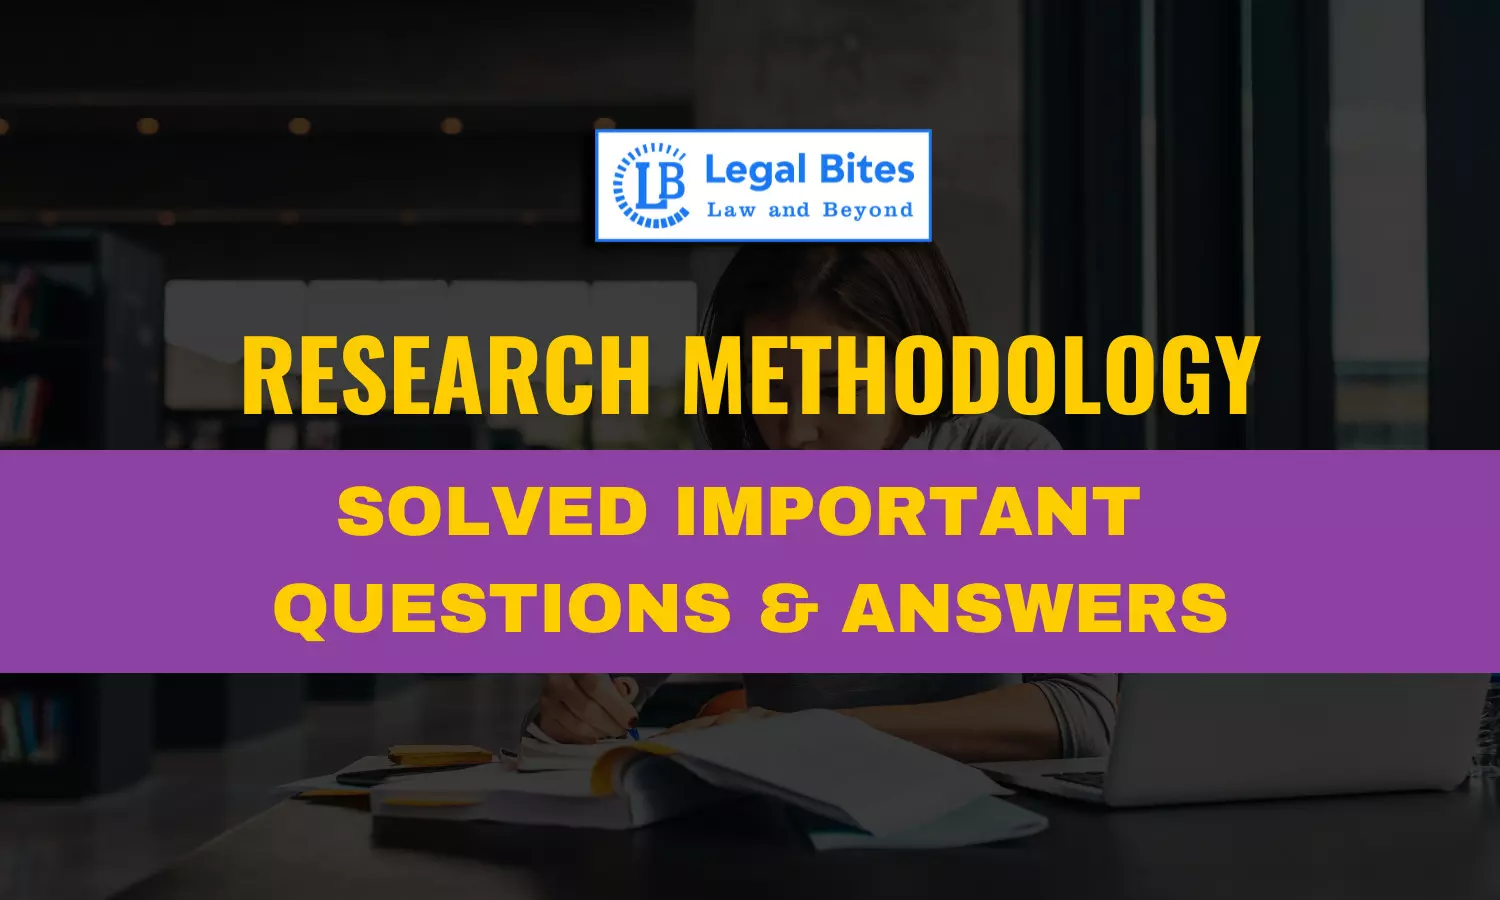 What is the role of the Law Commission of India in legal research? Cite one of its recommendations and point out the research content in it.